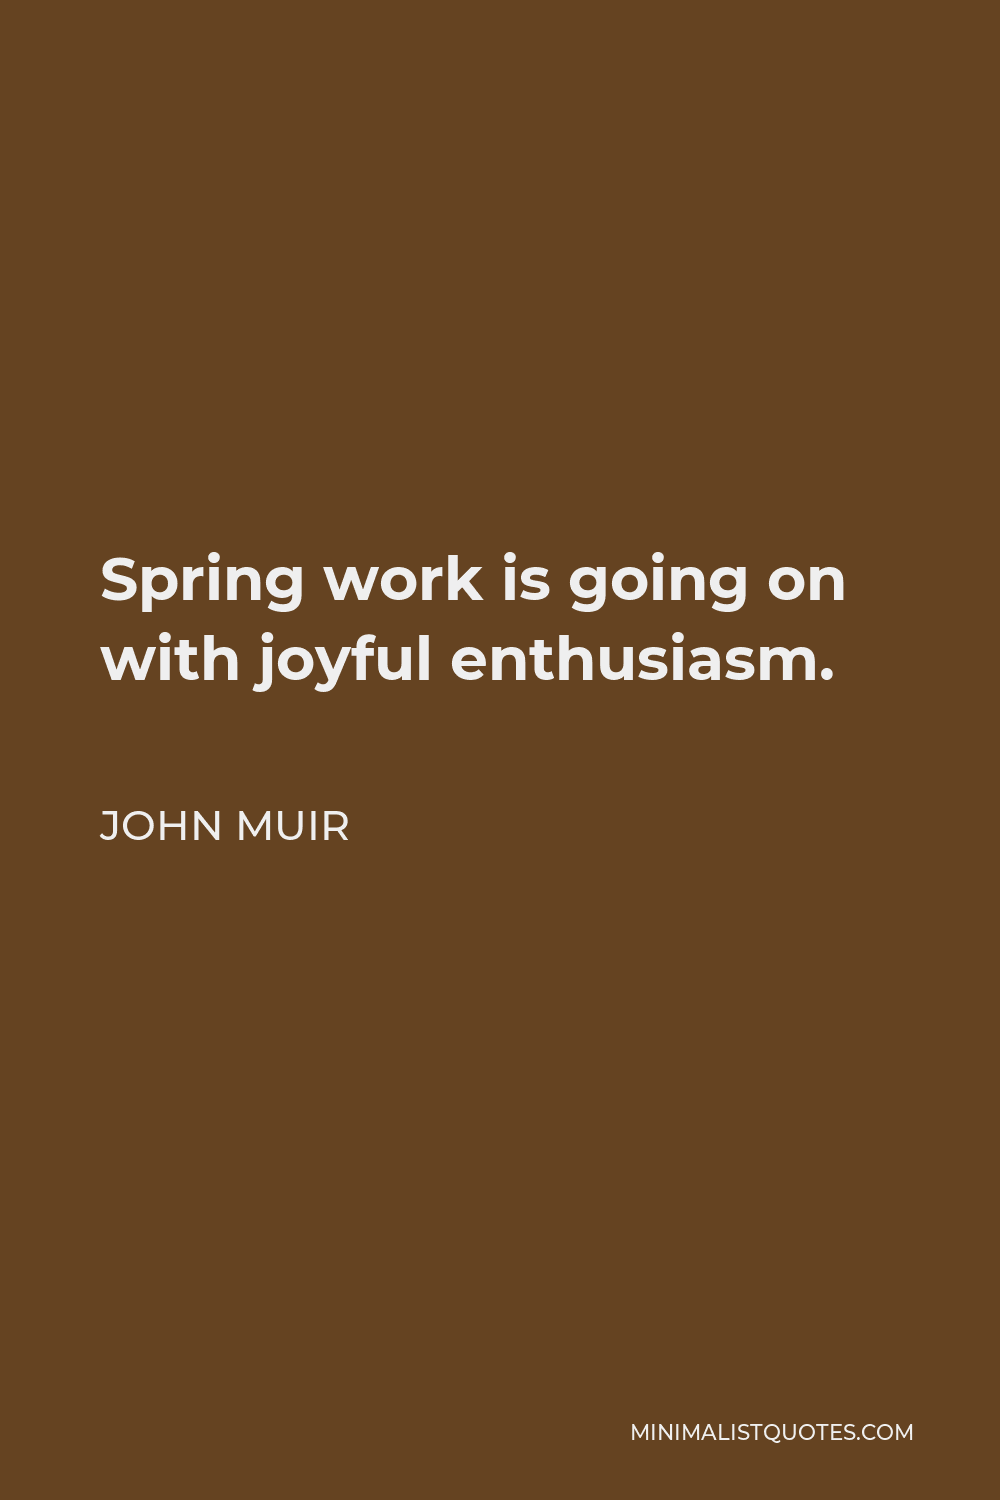 John Muir Quote - Spring work is going on with joyful enthusiasm.